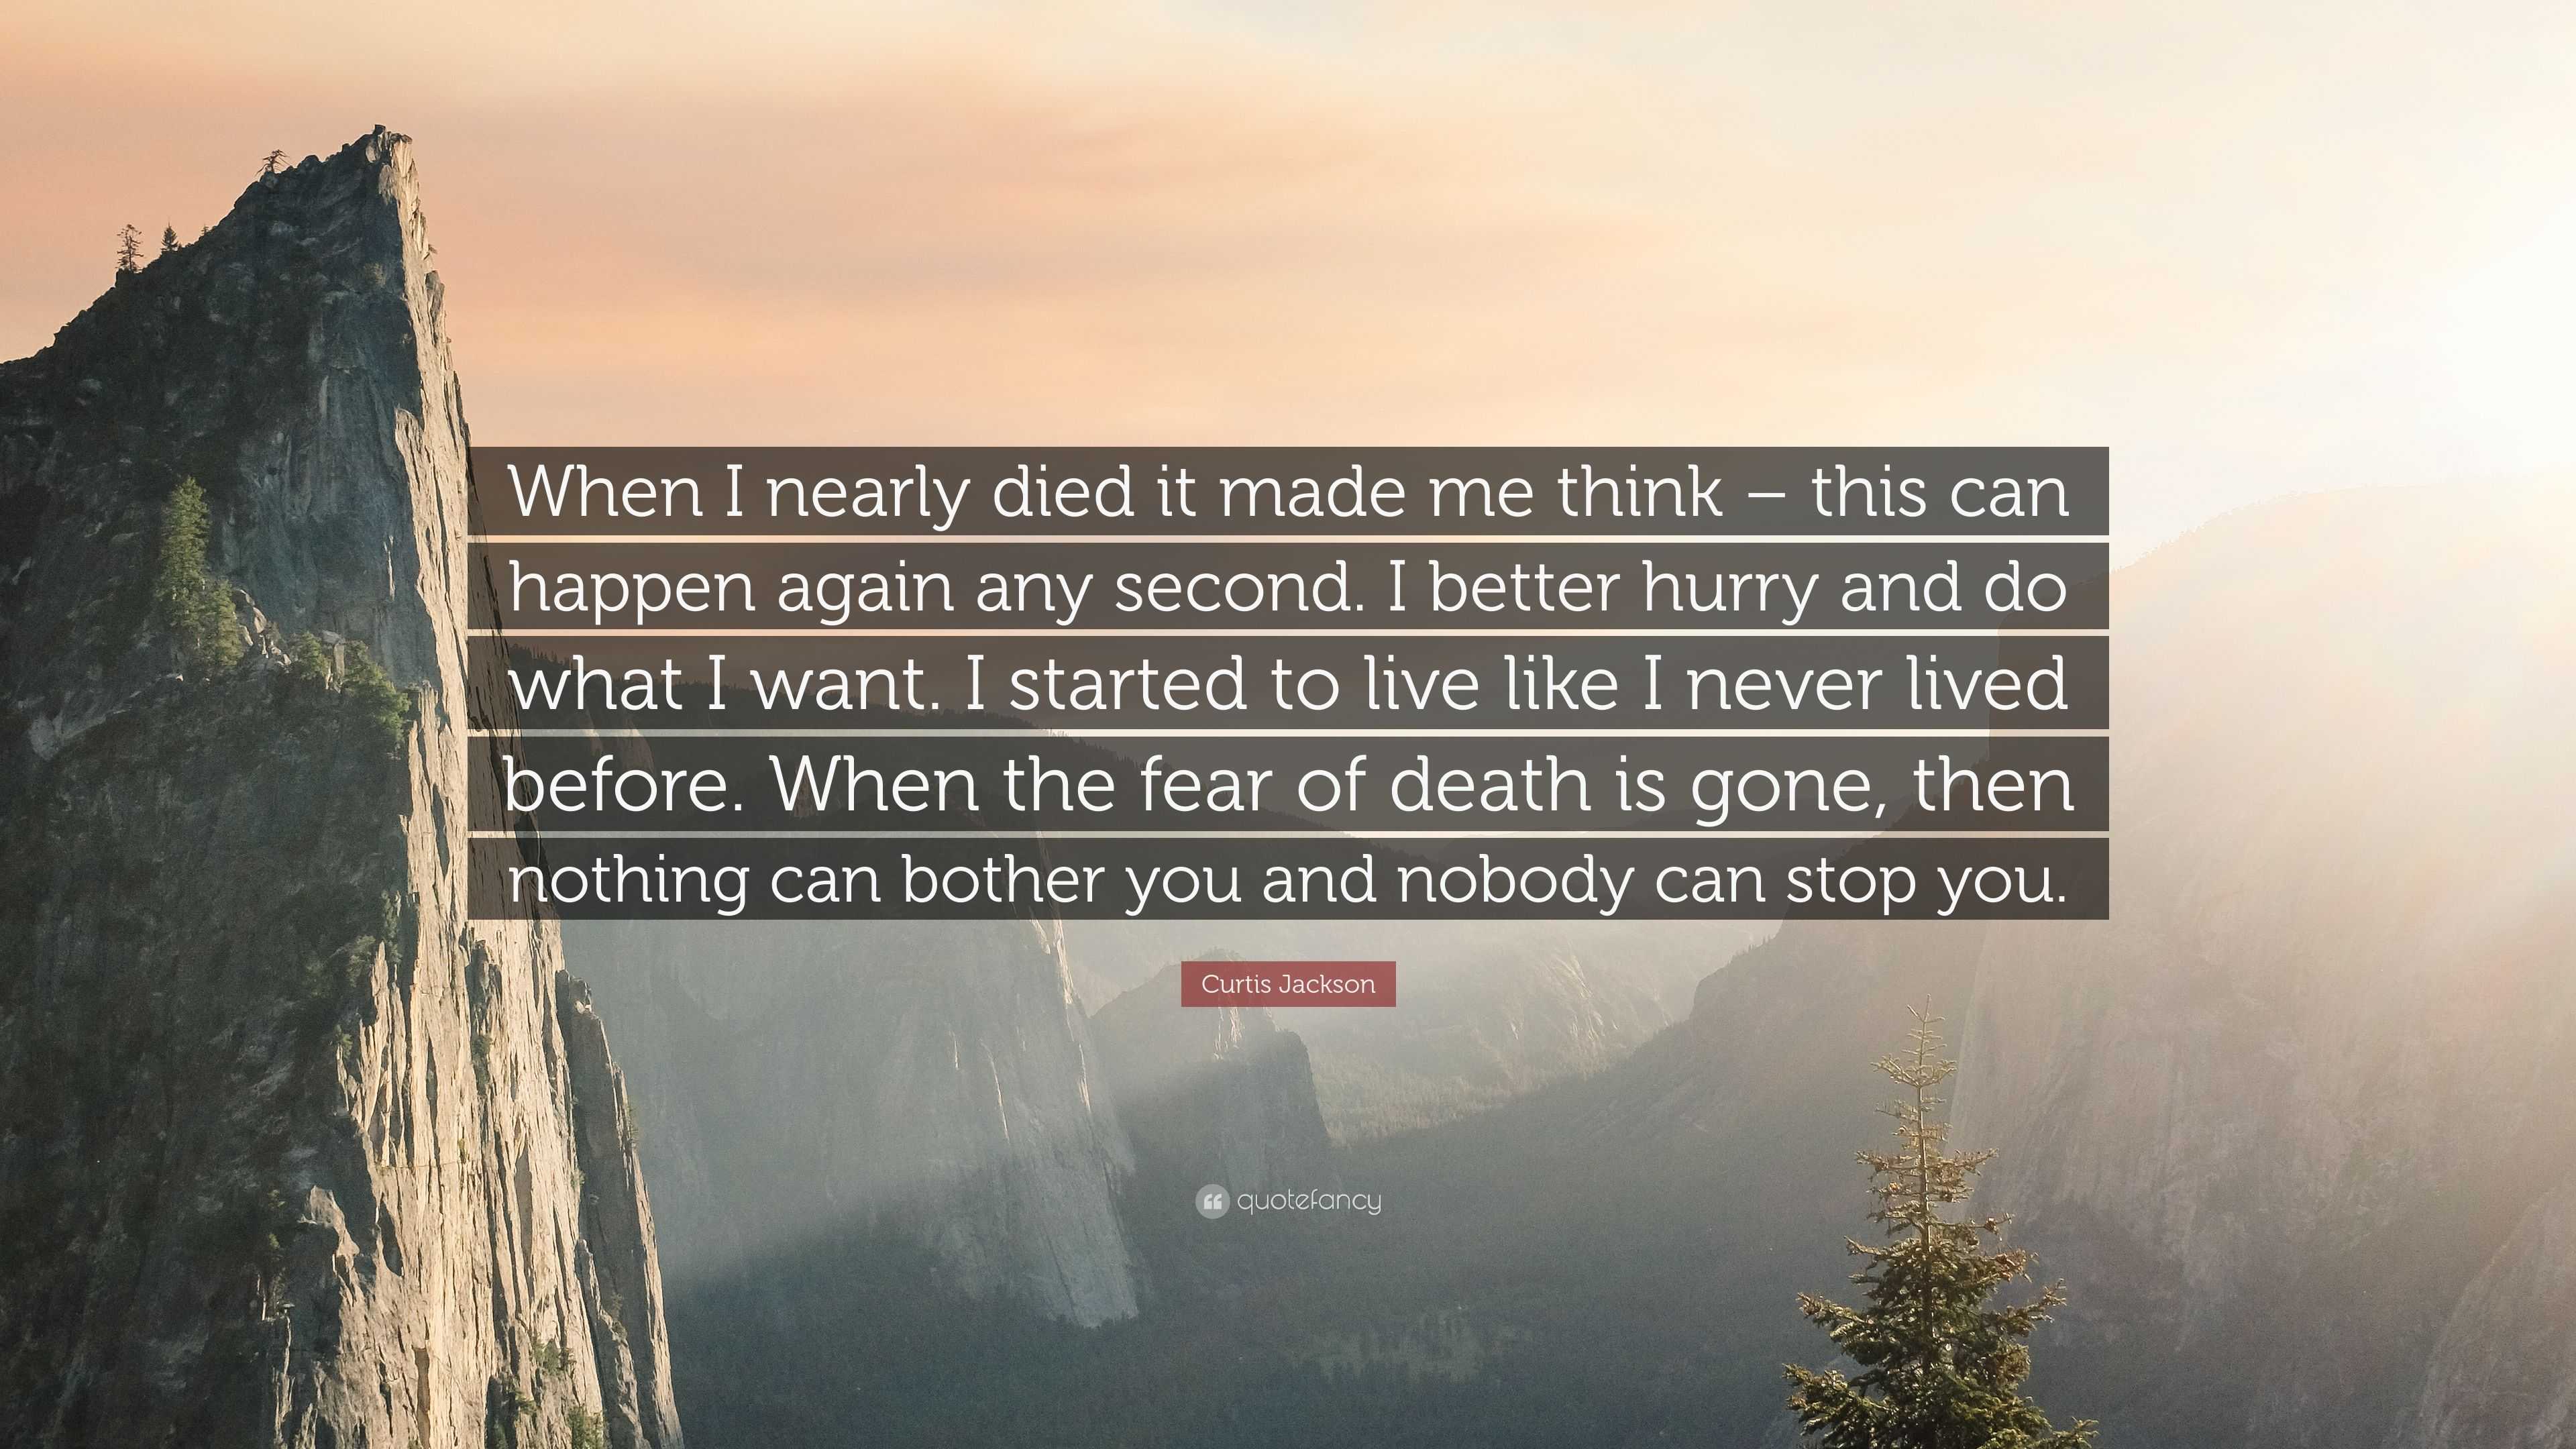 Curtis Jackson Quote: “When I nearly died it made me think – this can ...